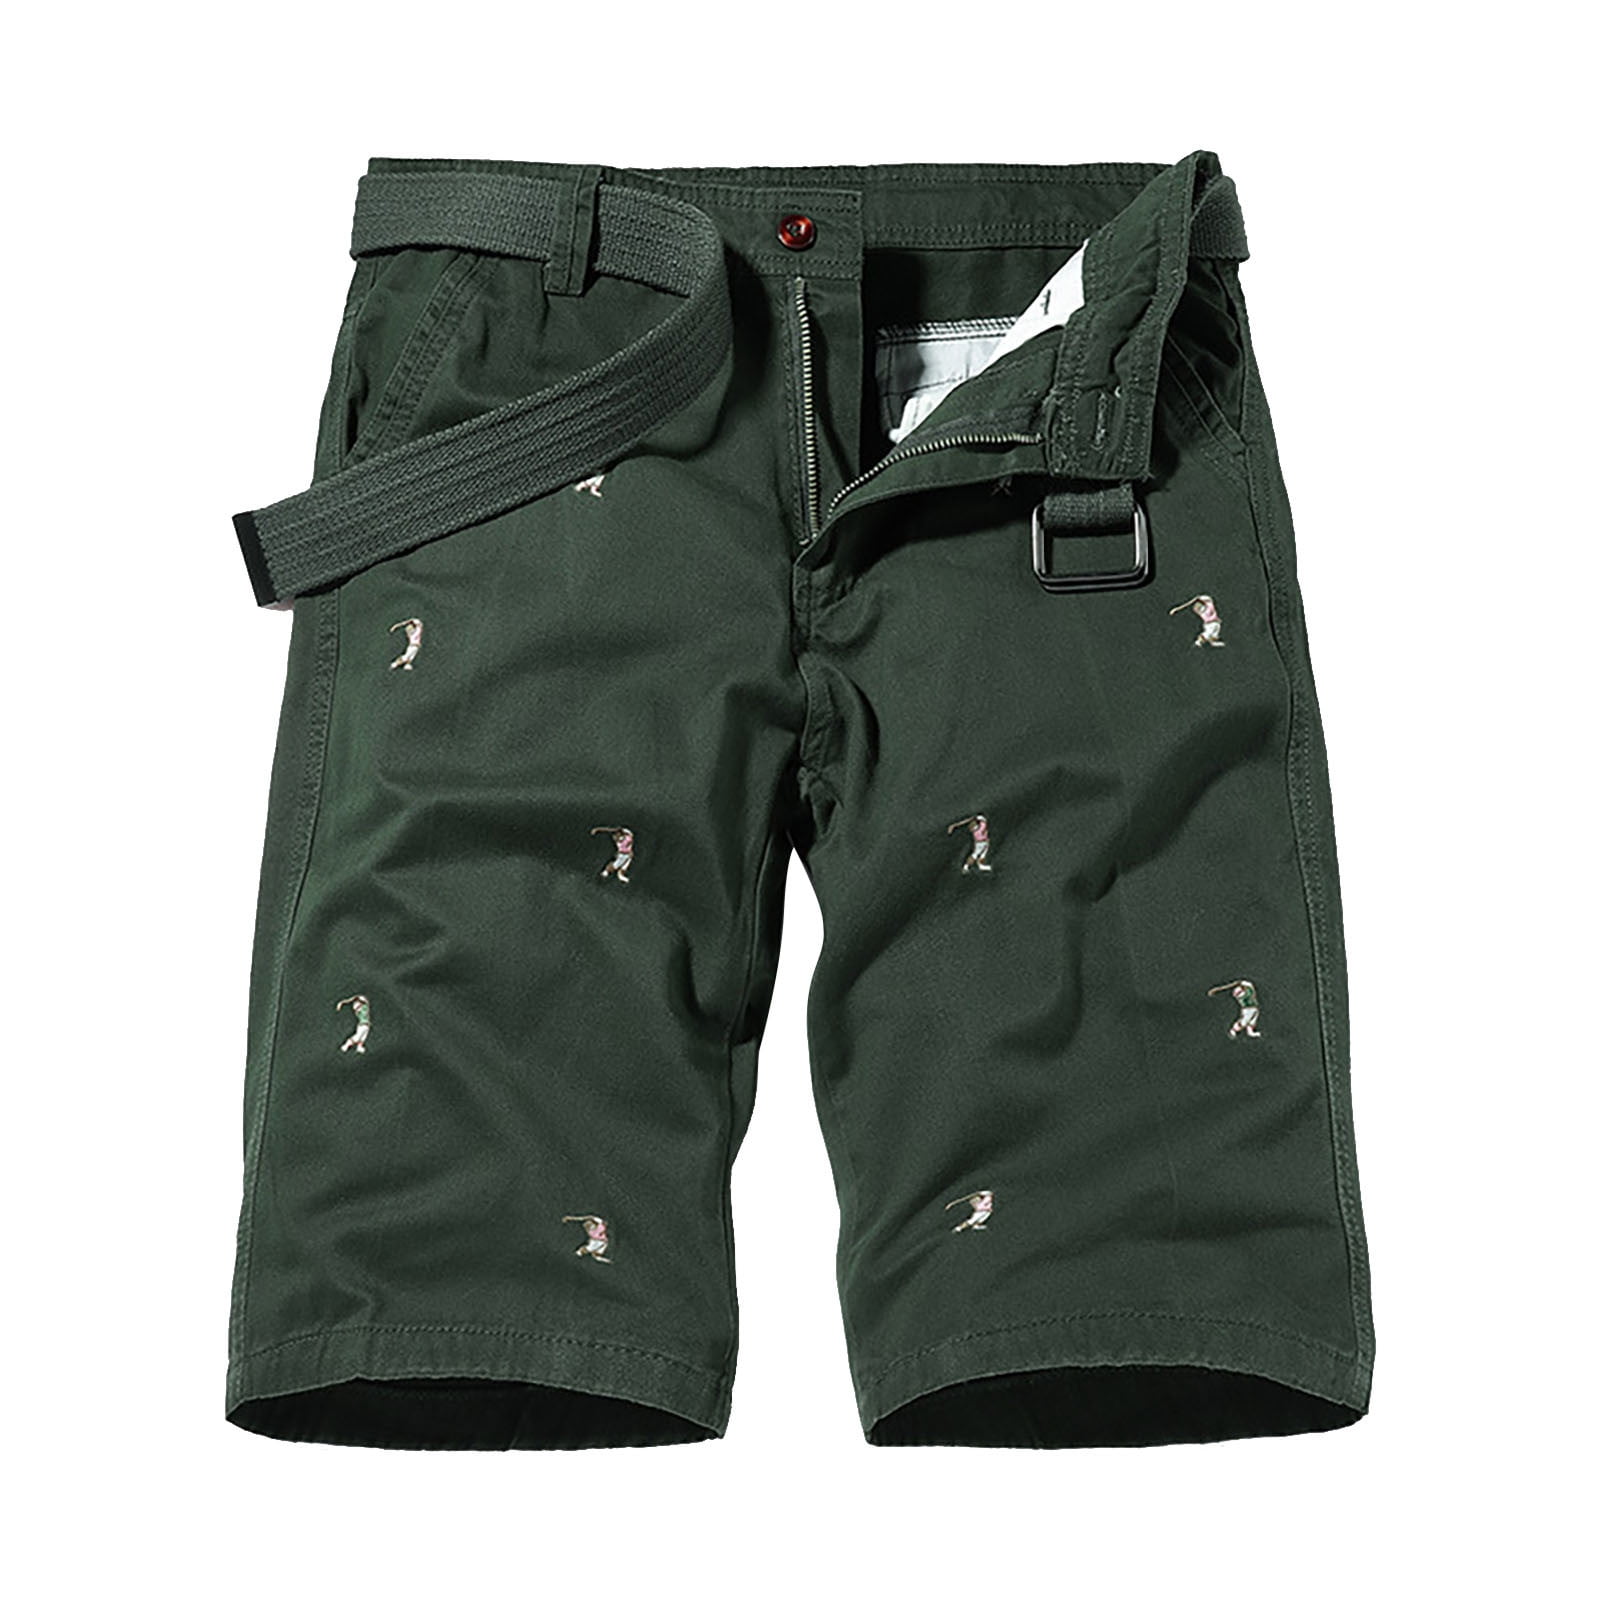 Mens Shorts Outdoor Elastic Waist Relaxed Fit Cotton Lightweight Quick Dry Fishing  Hiking Work Short Pant Green 32 